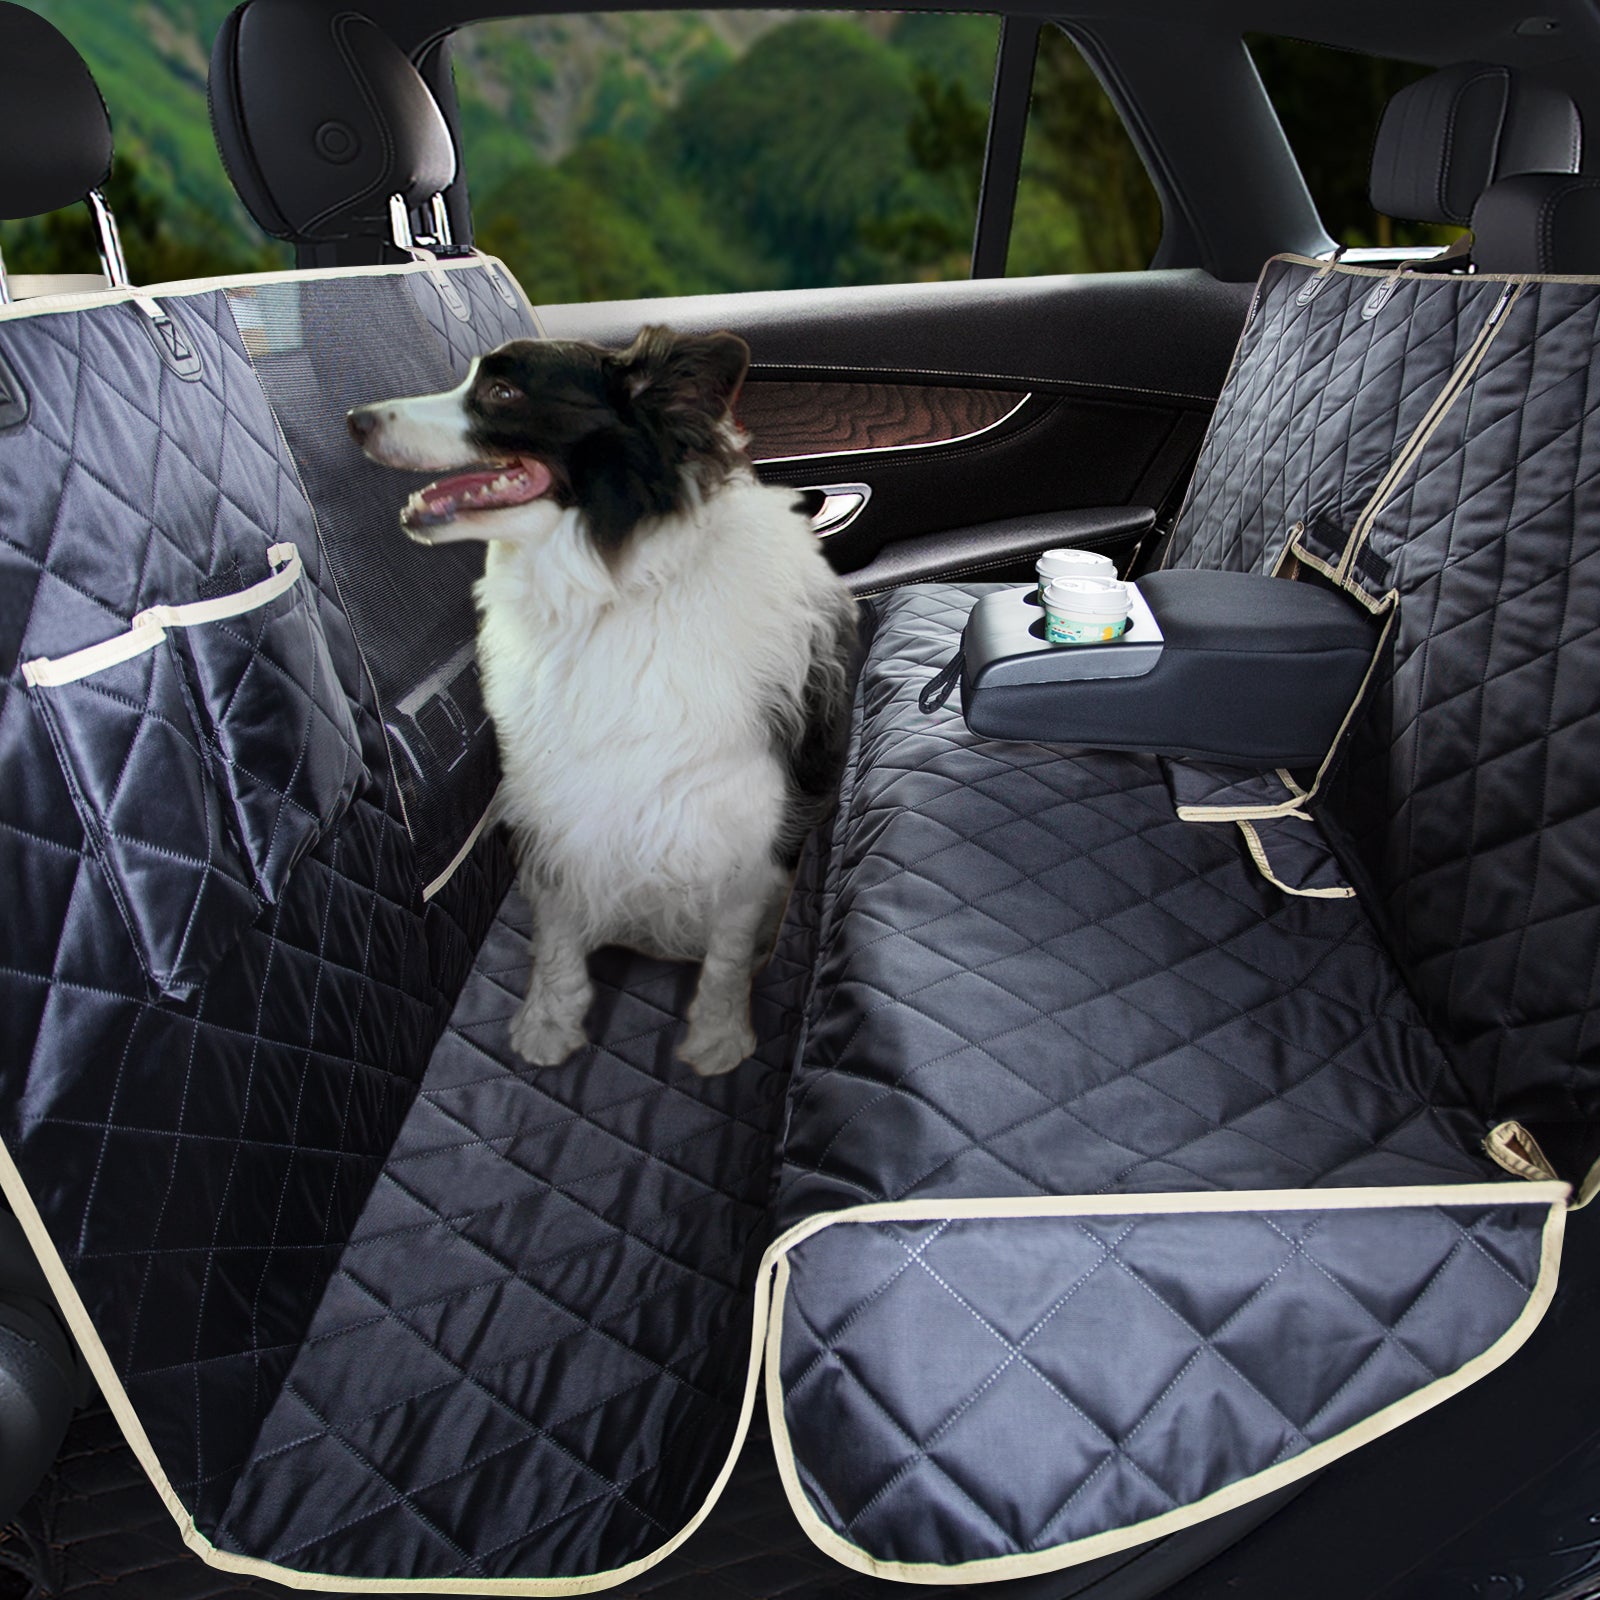 Lassie 4 in 1 Dog Floor Hammock for Universal Size,100% Waterproof Backseat Cover Dog Car Seat Covers for Back Seat with Mesh Window for Sedans, Bench Protector for Cars, SUVs and Trucks etc